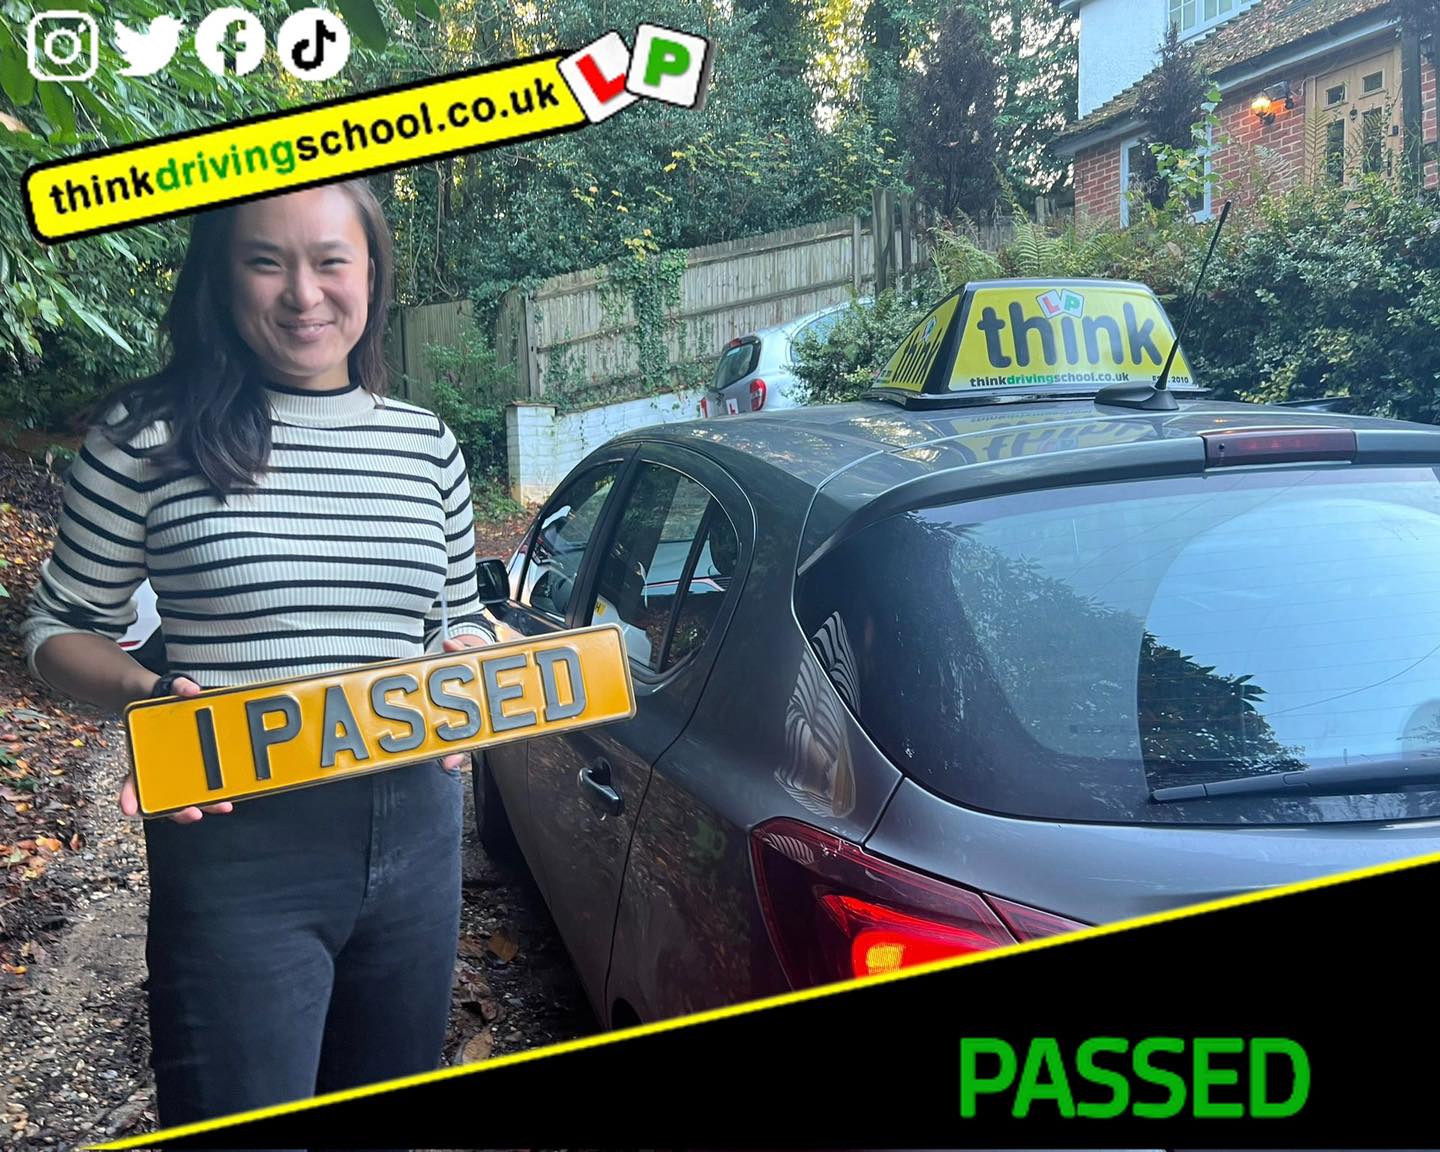 Monika passed with richard young from Farnham driving school in March 2022